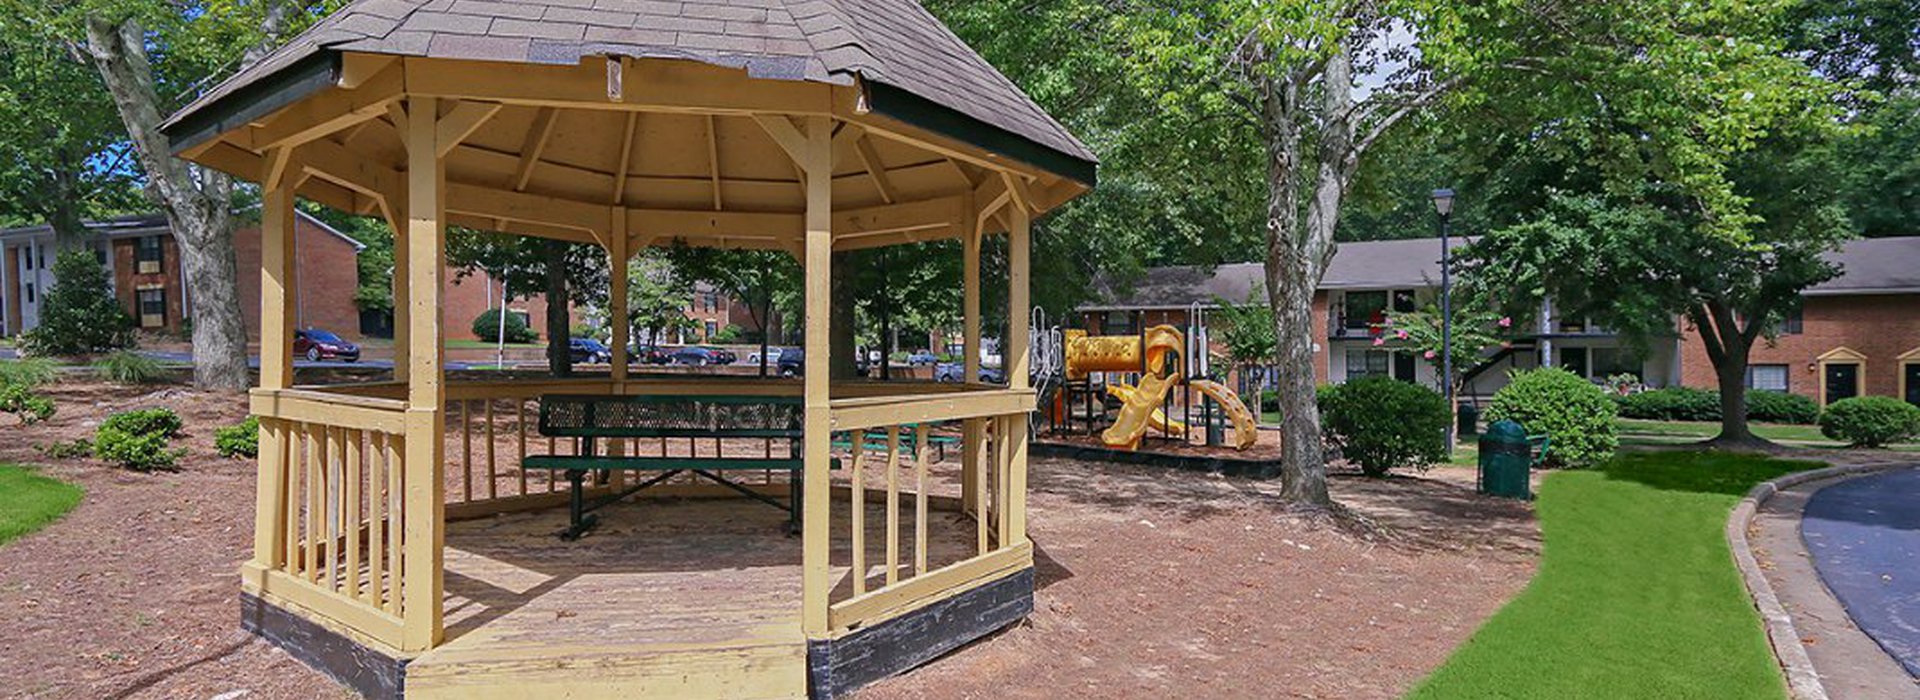 space for recreation of children with green trees providing shade.